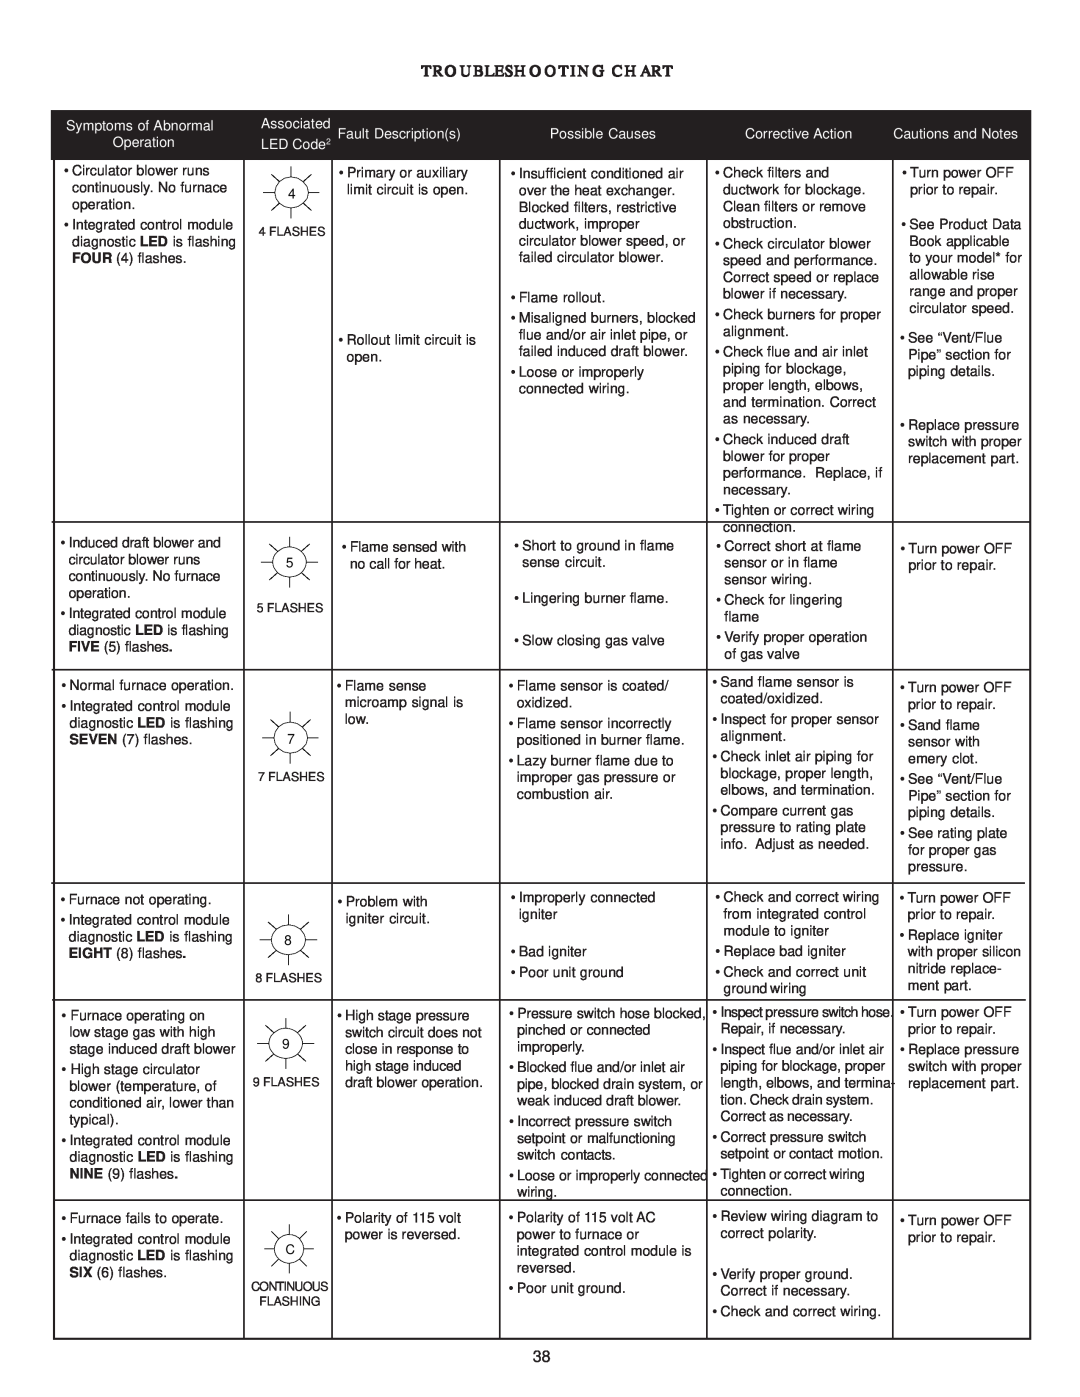 Amana AMV9 Troubleshooting Chart, Symptoms of Abnormal, Fault Descriptions, Possible Causes, Corrective Action, Operation 